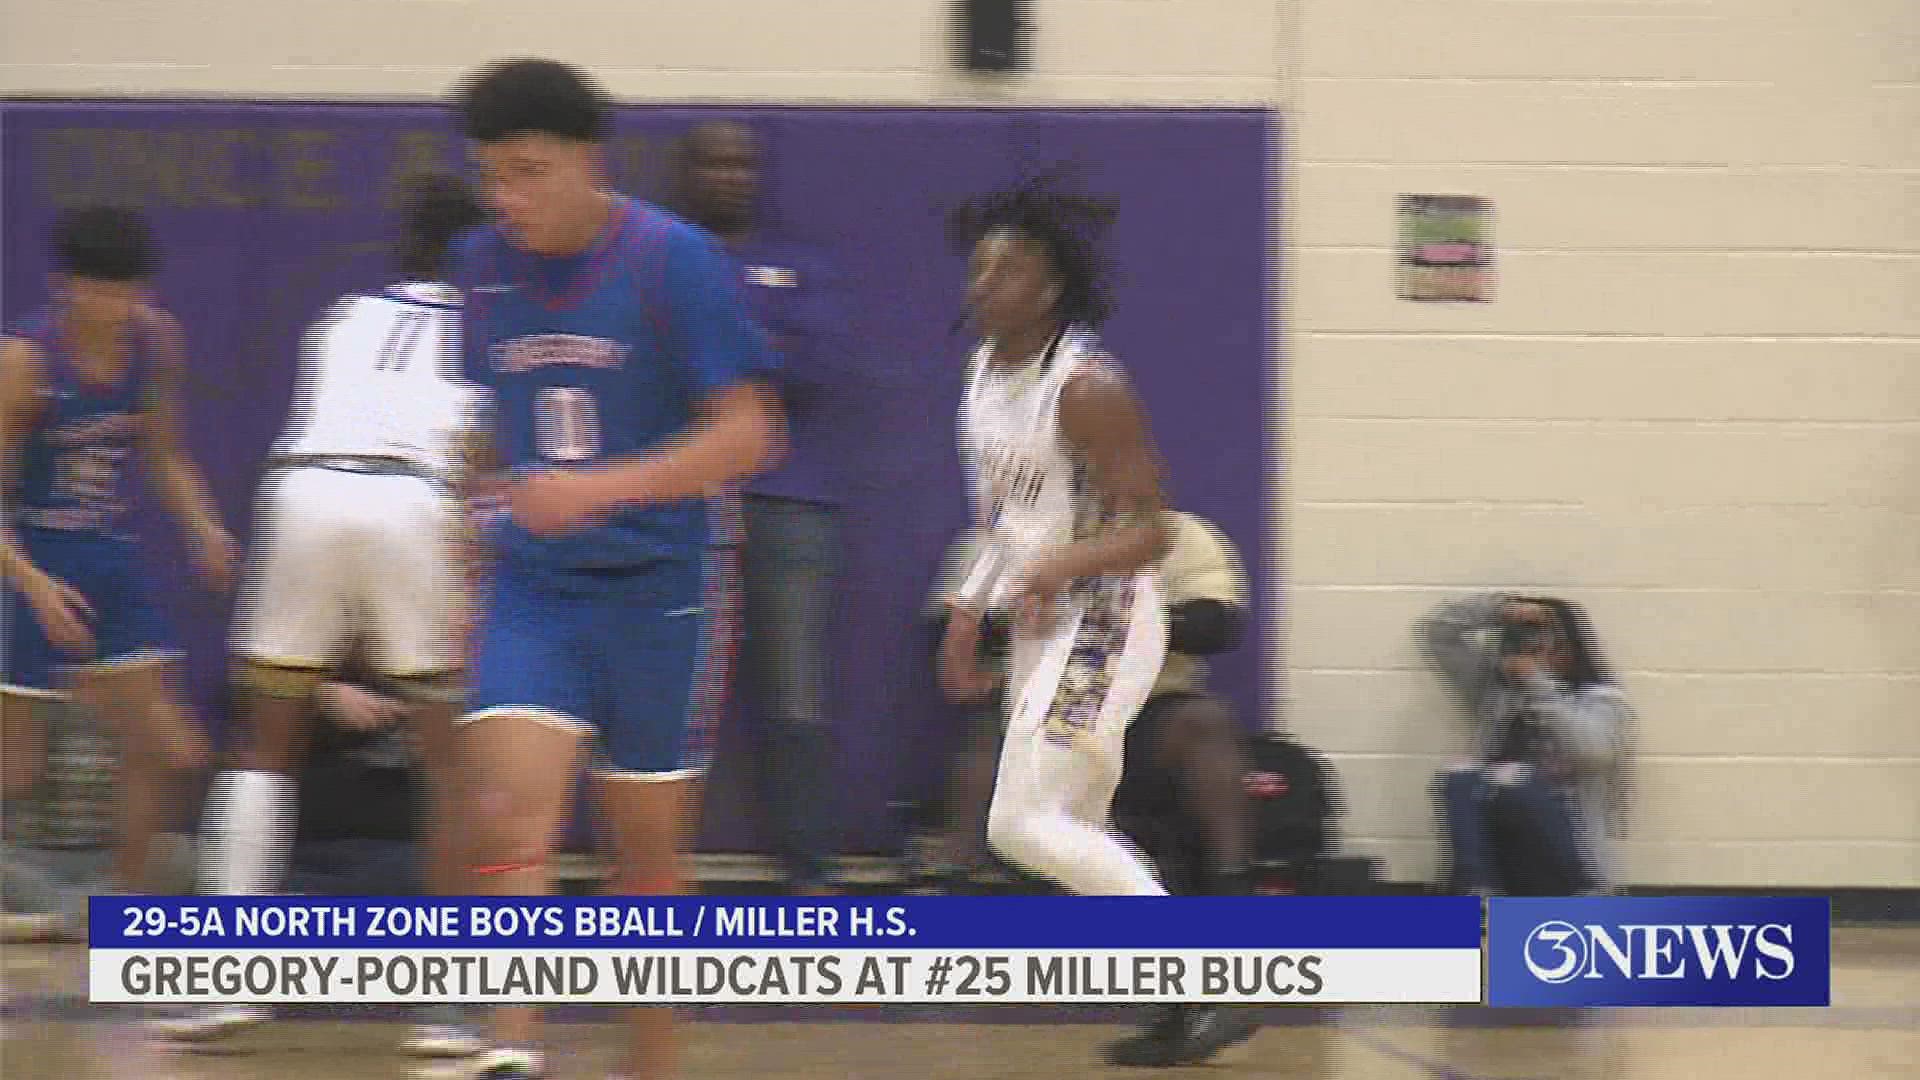 The Miller boys remained perfect in zone play while the Gregory-Portland girls coasted on the road.